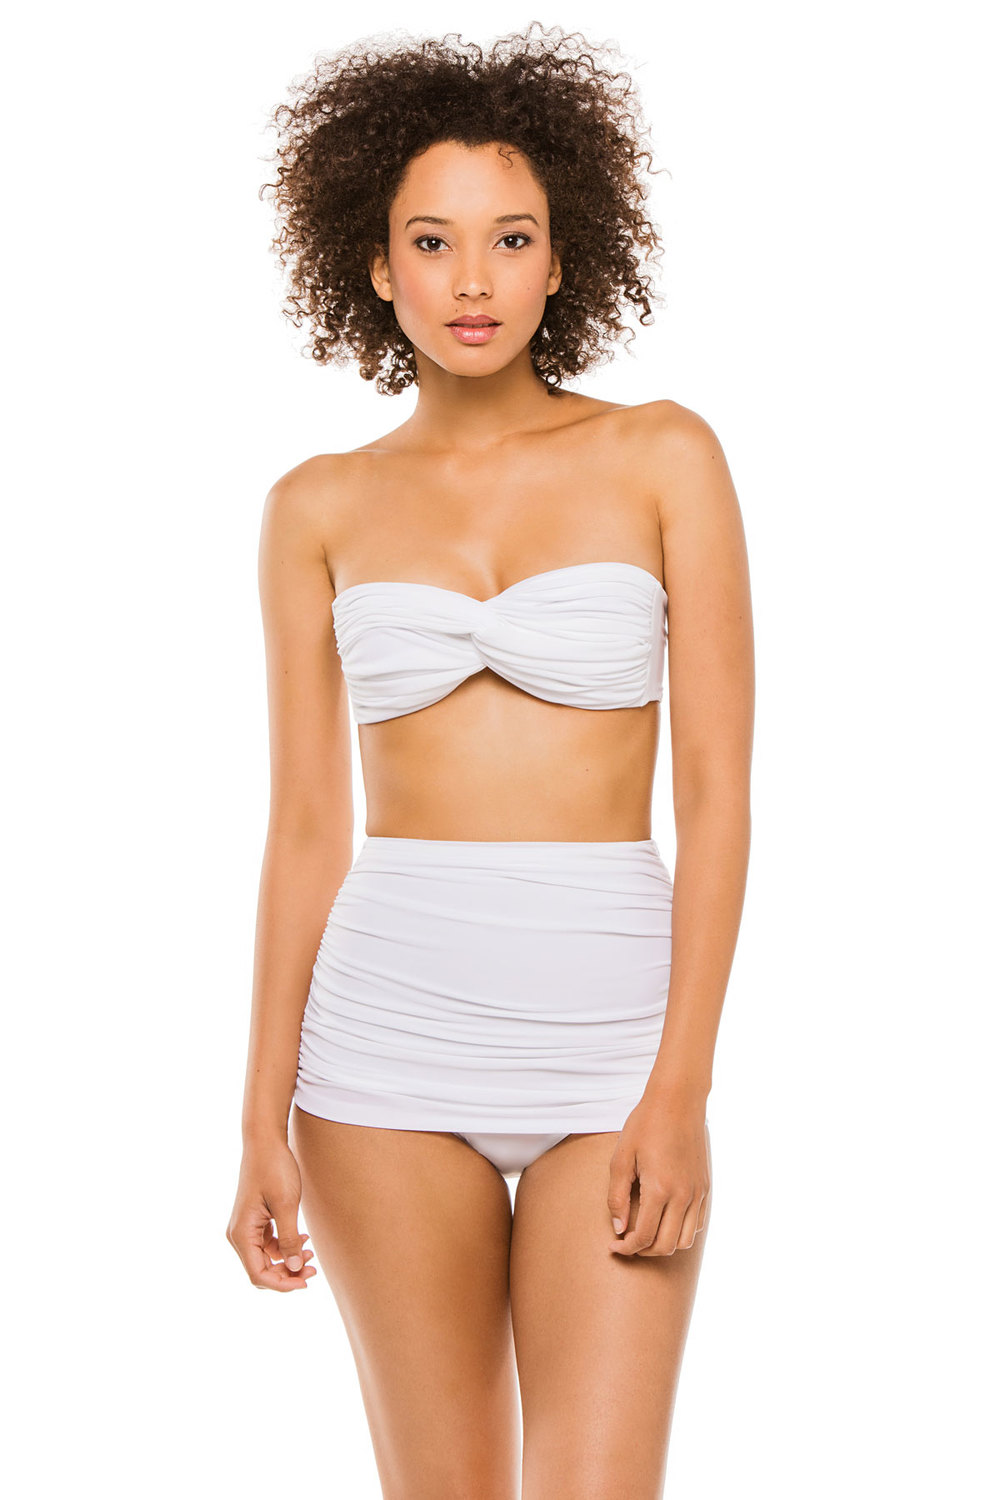  Norma Kamali's Bandeau Top and Bottoms. Available in white, black. Sold Separately. Everything but Water. $175 Nd $185.  